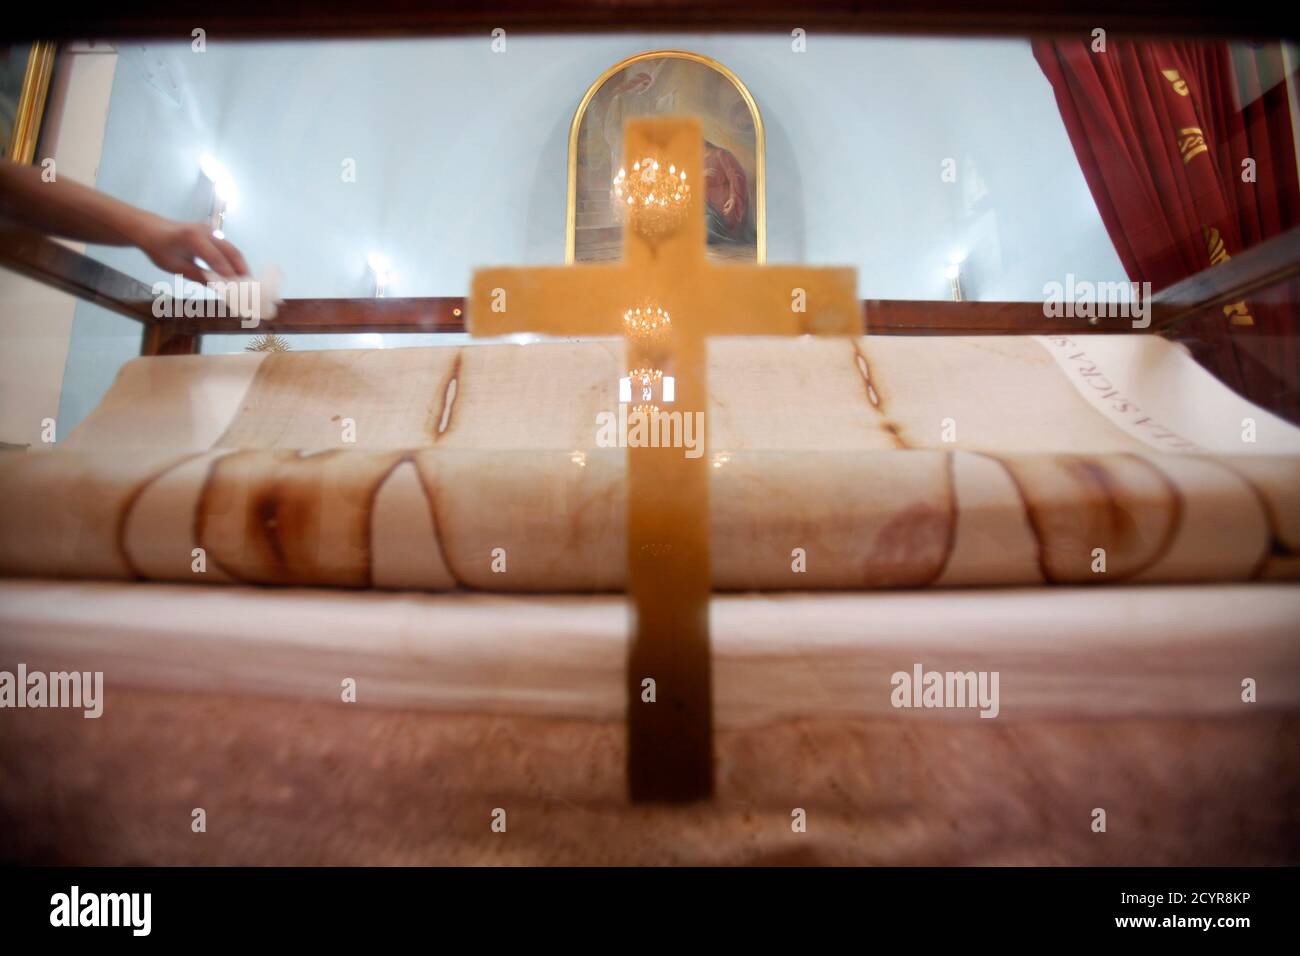 A Man Touches A Copy Of The Original Shroud Of Turin On Display At An Armenian Catholic Church